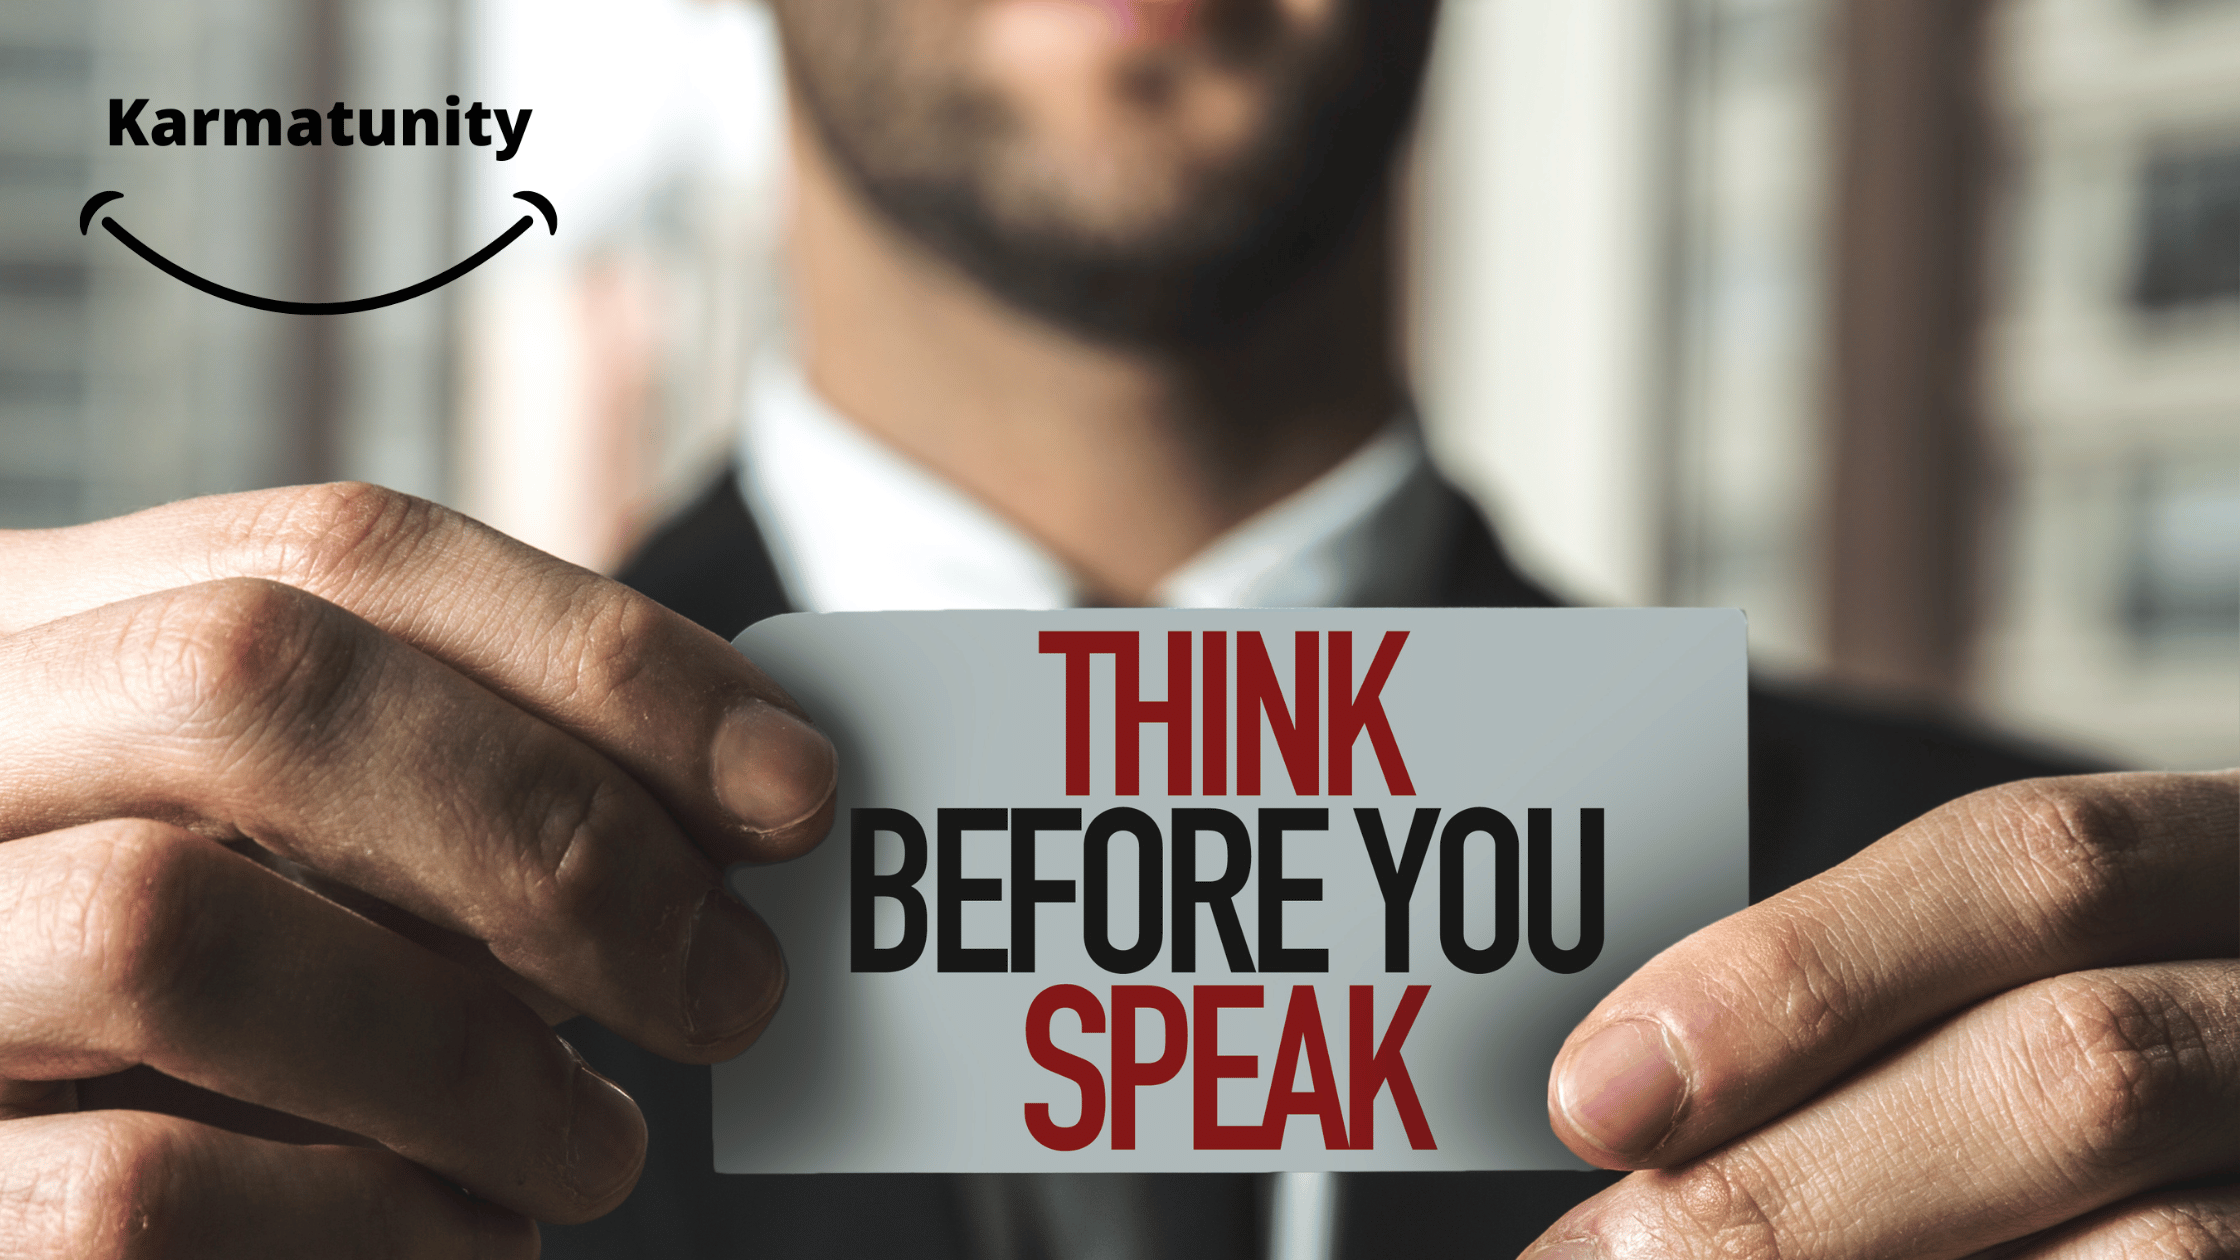 Thinking before speaking: The Flash Reflection